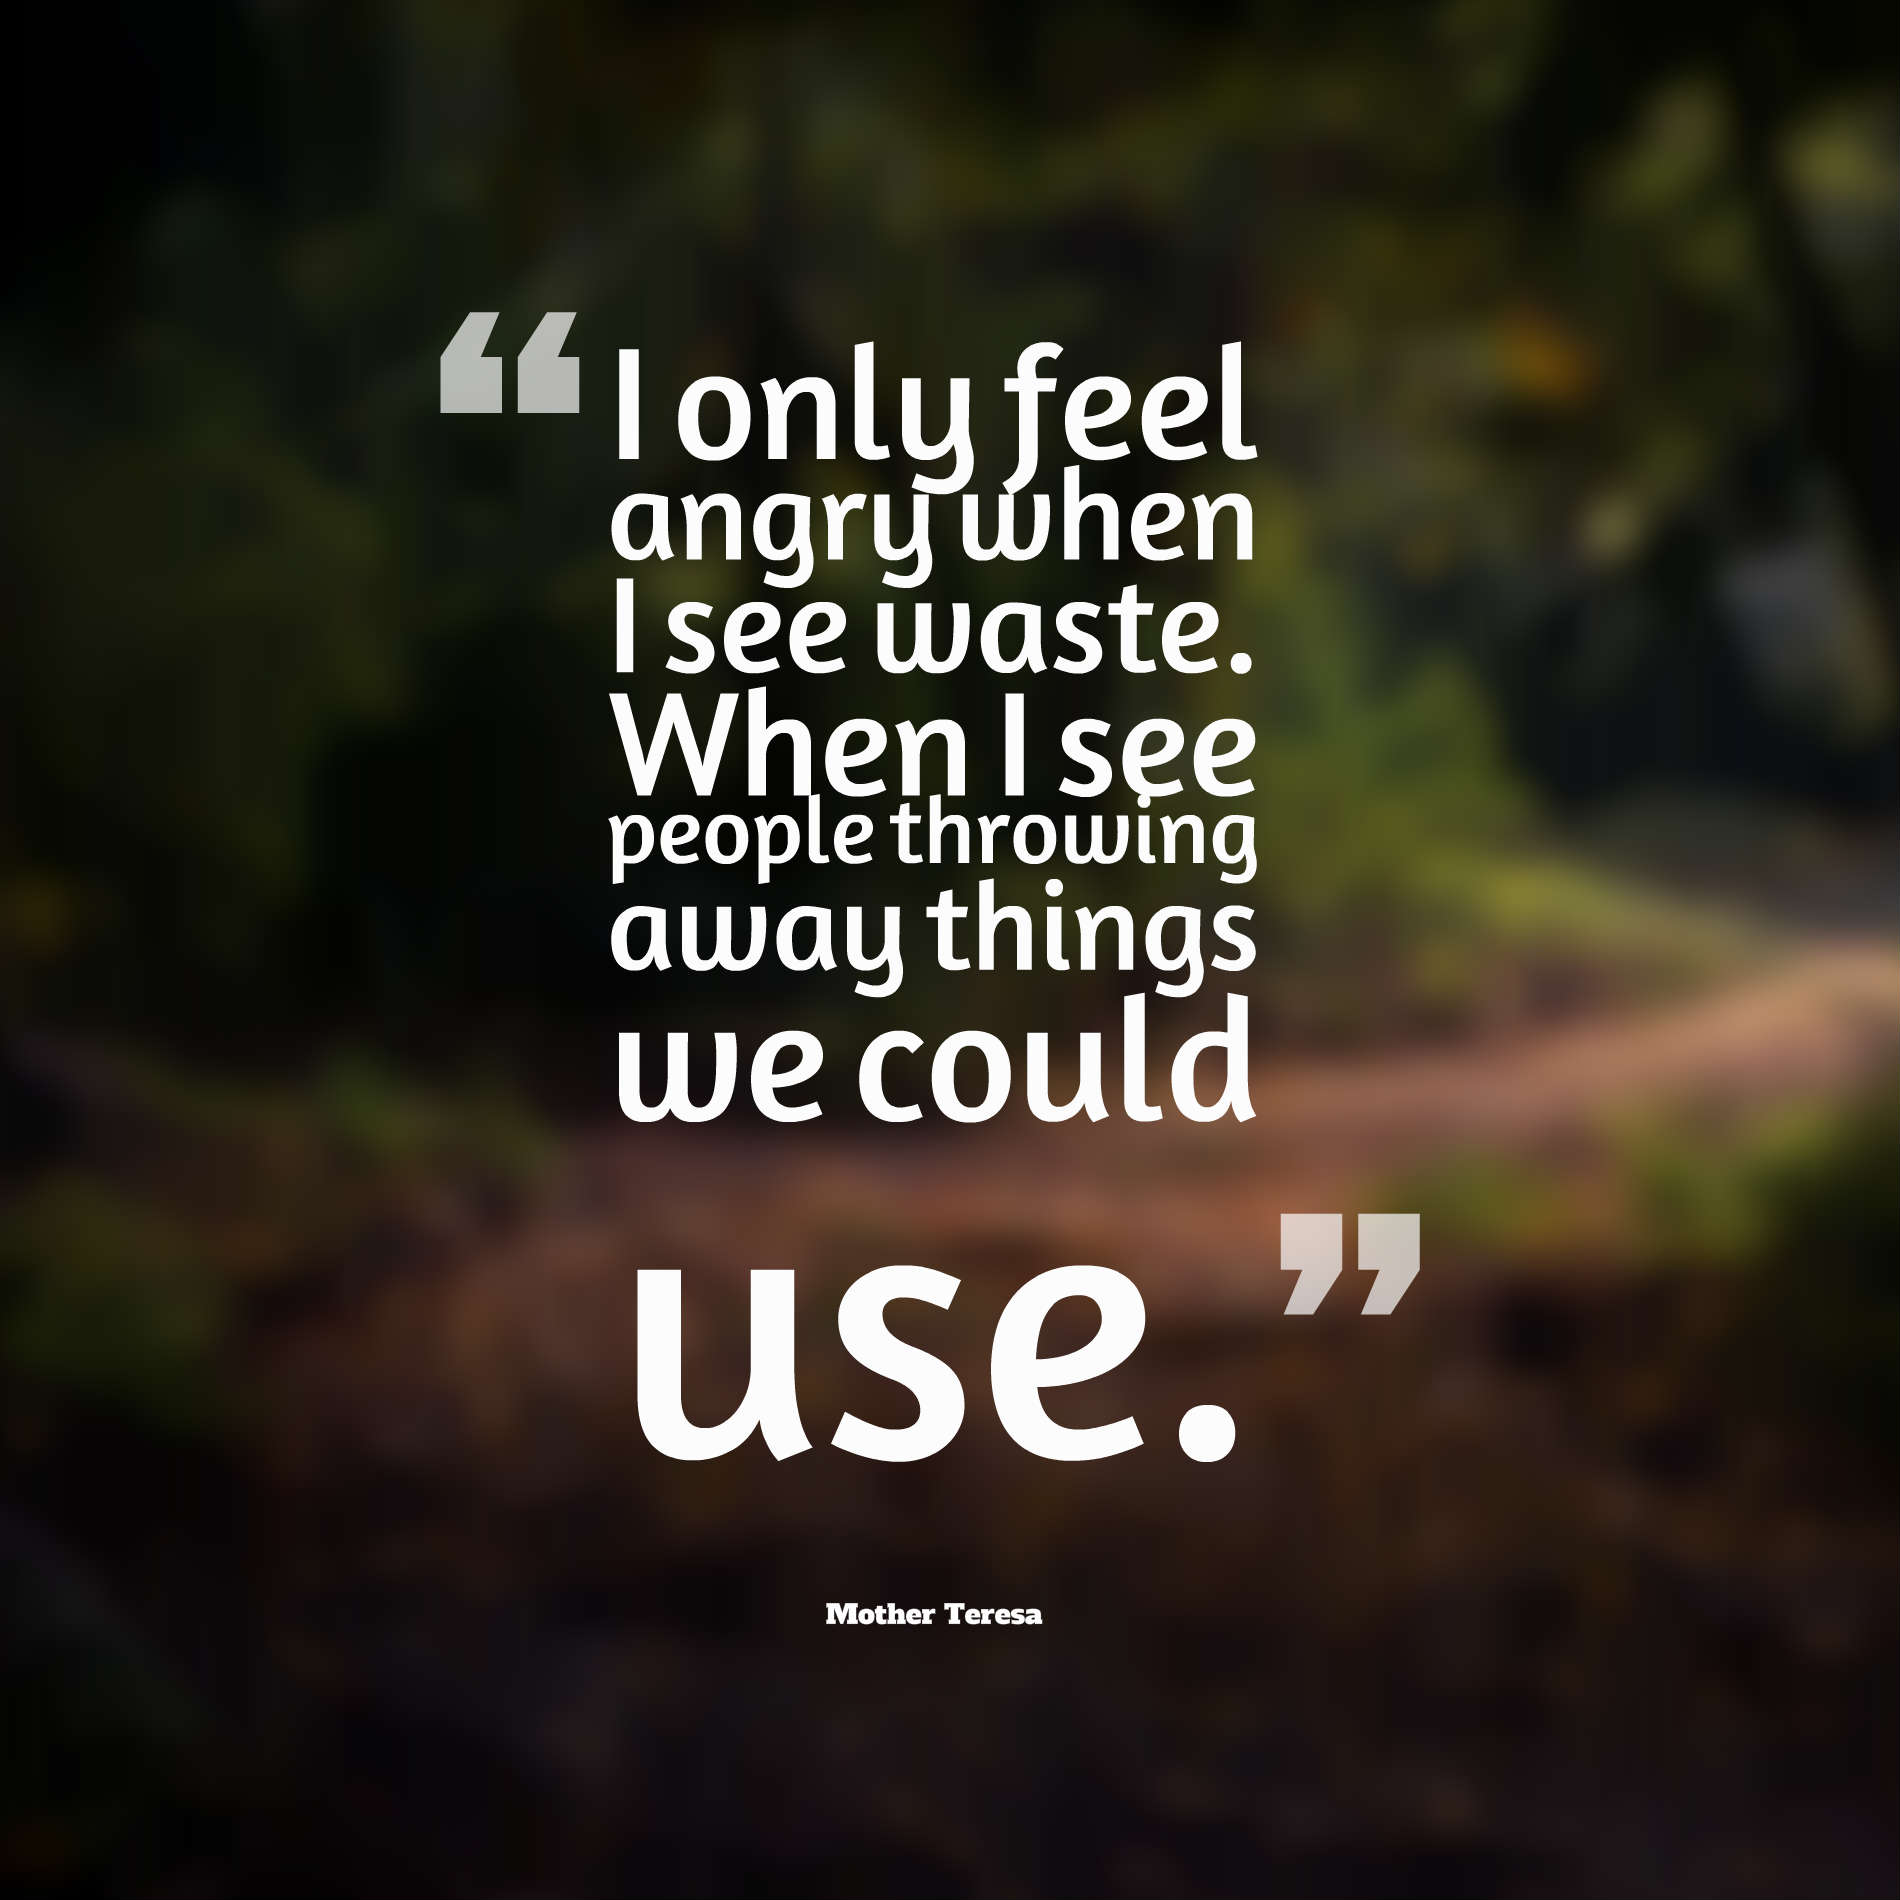 I only feel angry when I see waste. When I see people throwing away things we could use.